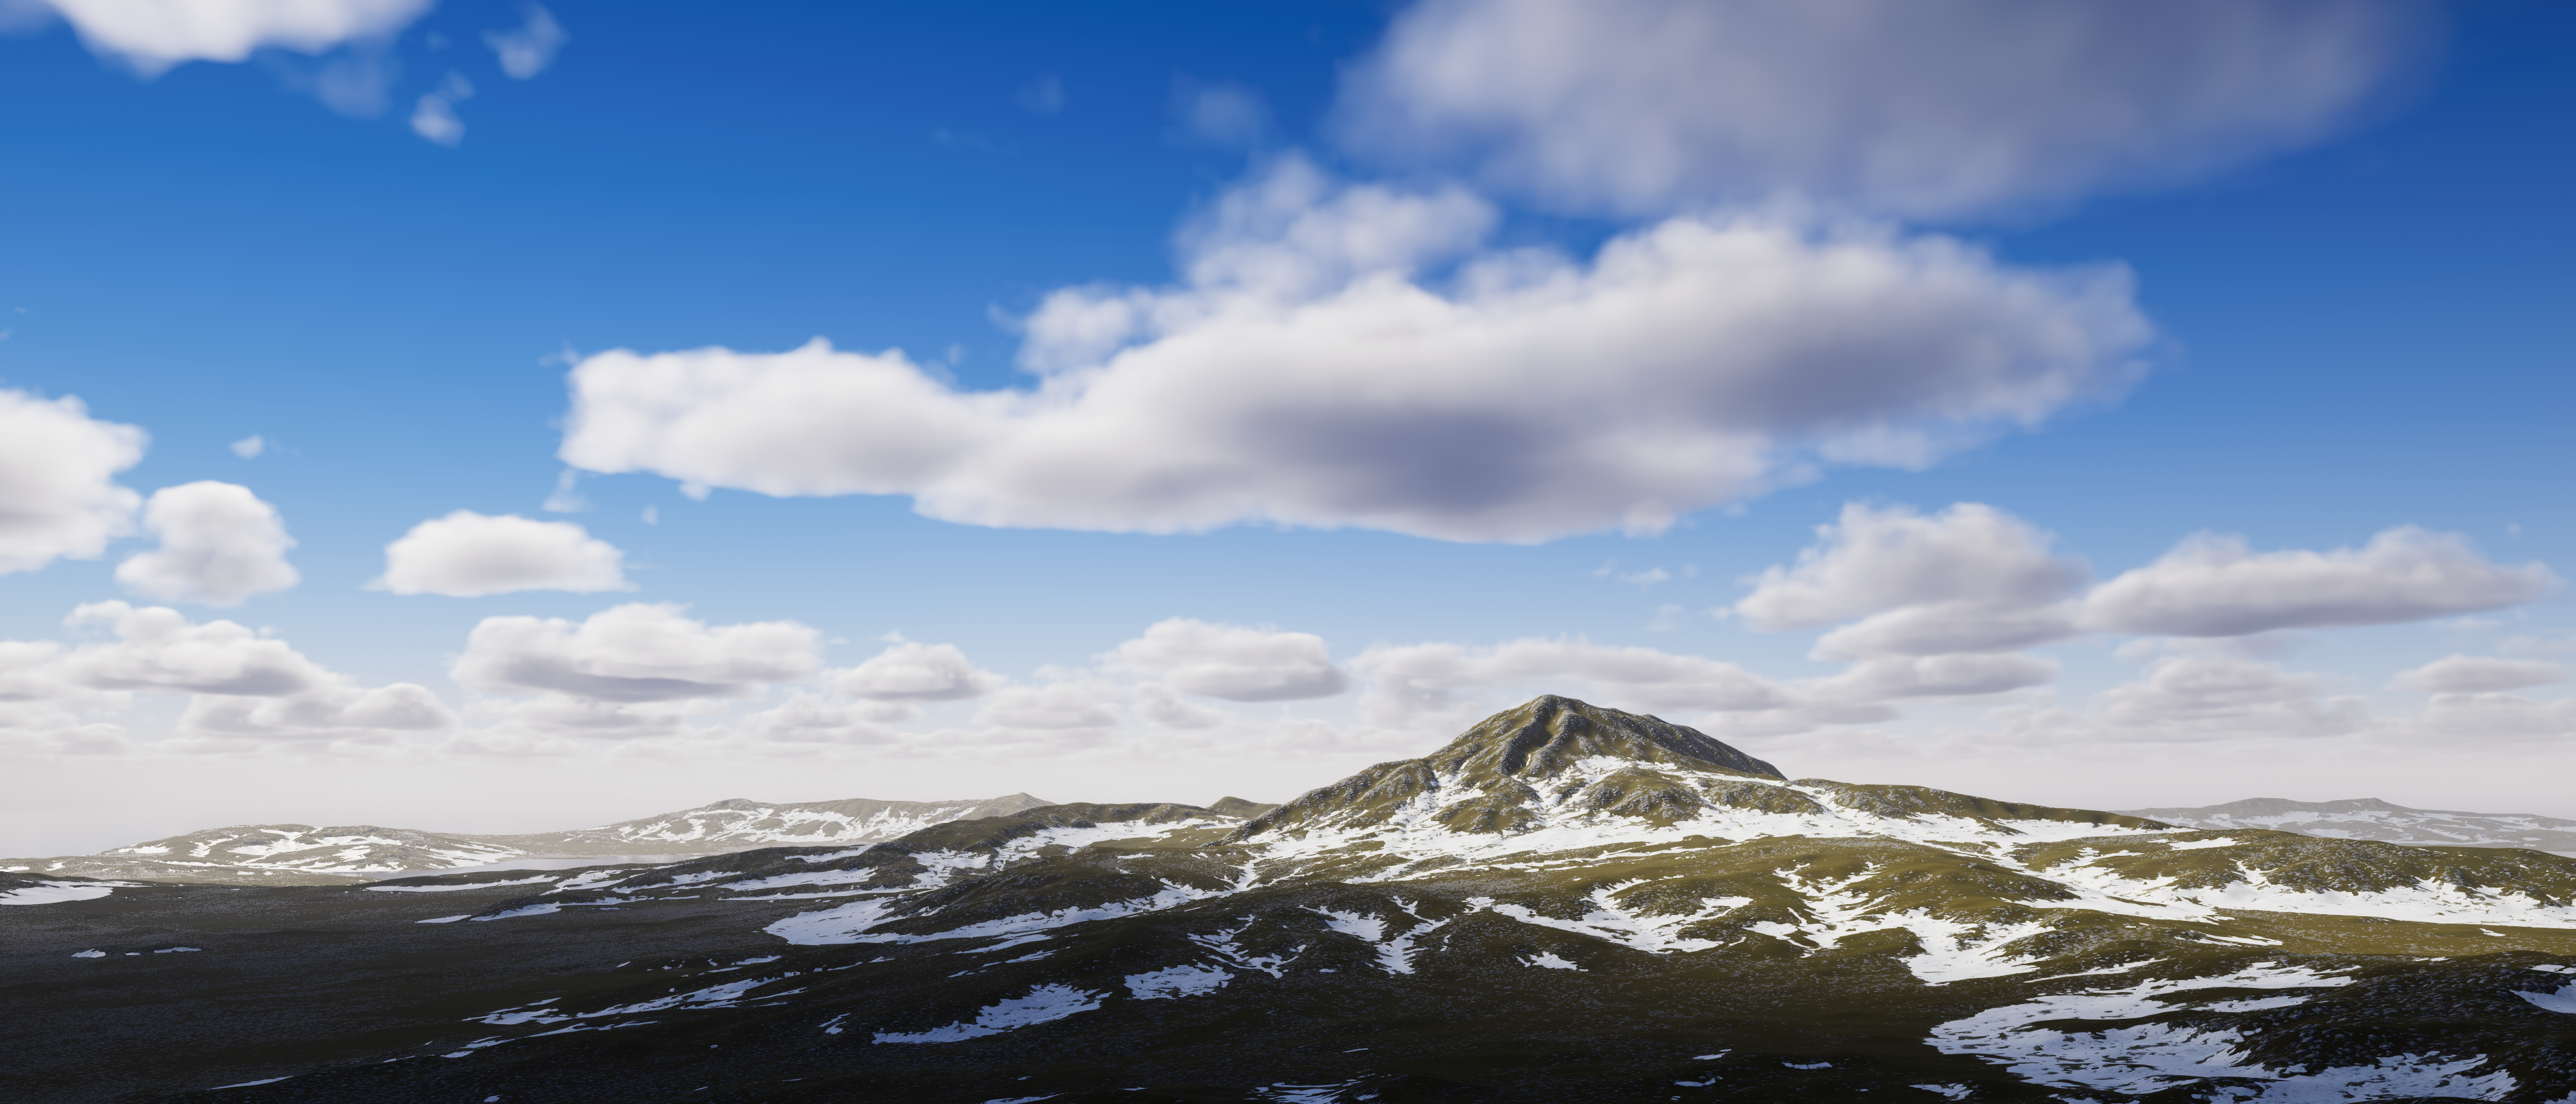 Image of blue sky with clouds over a snowy mountain and terrain